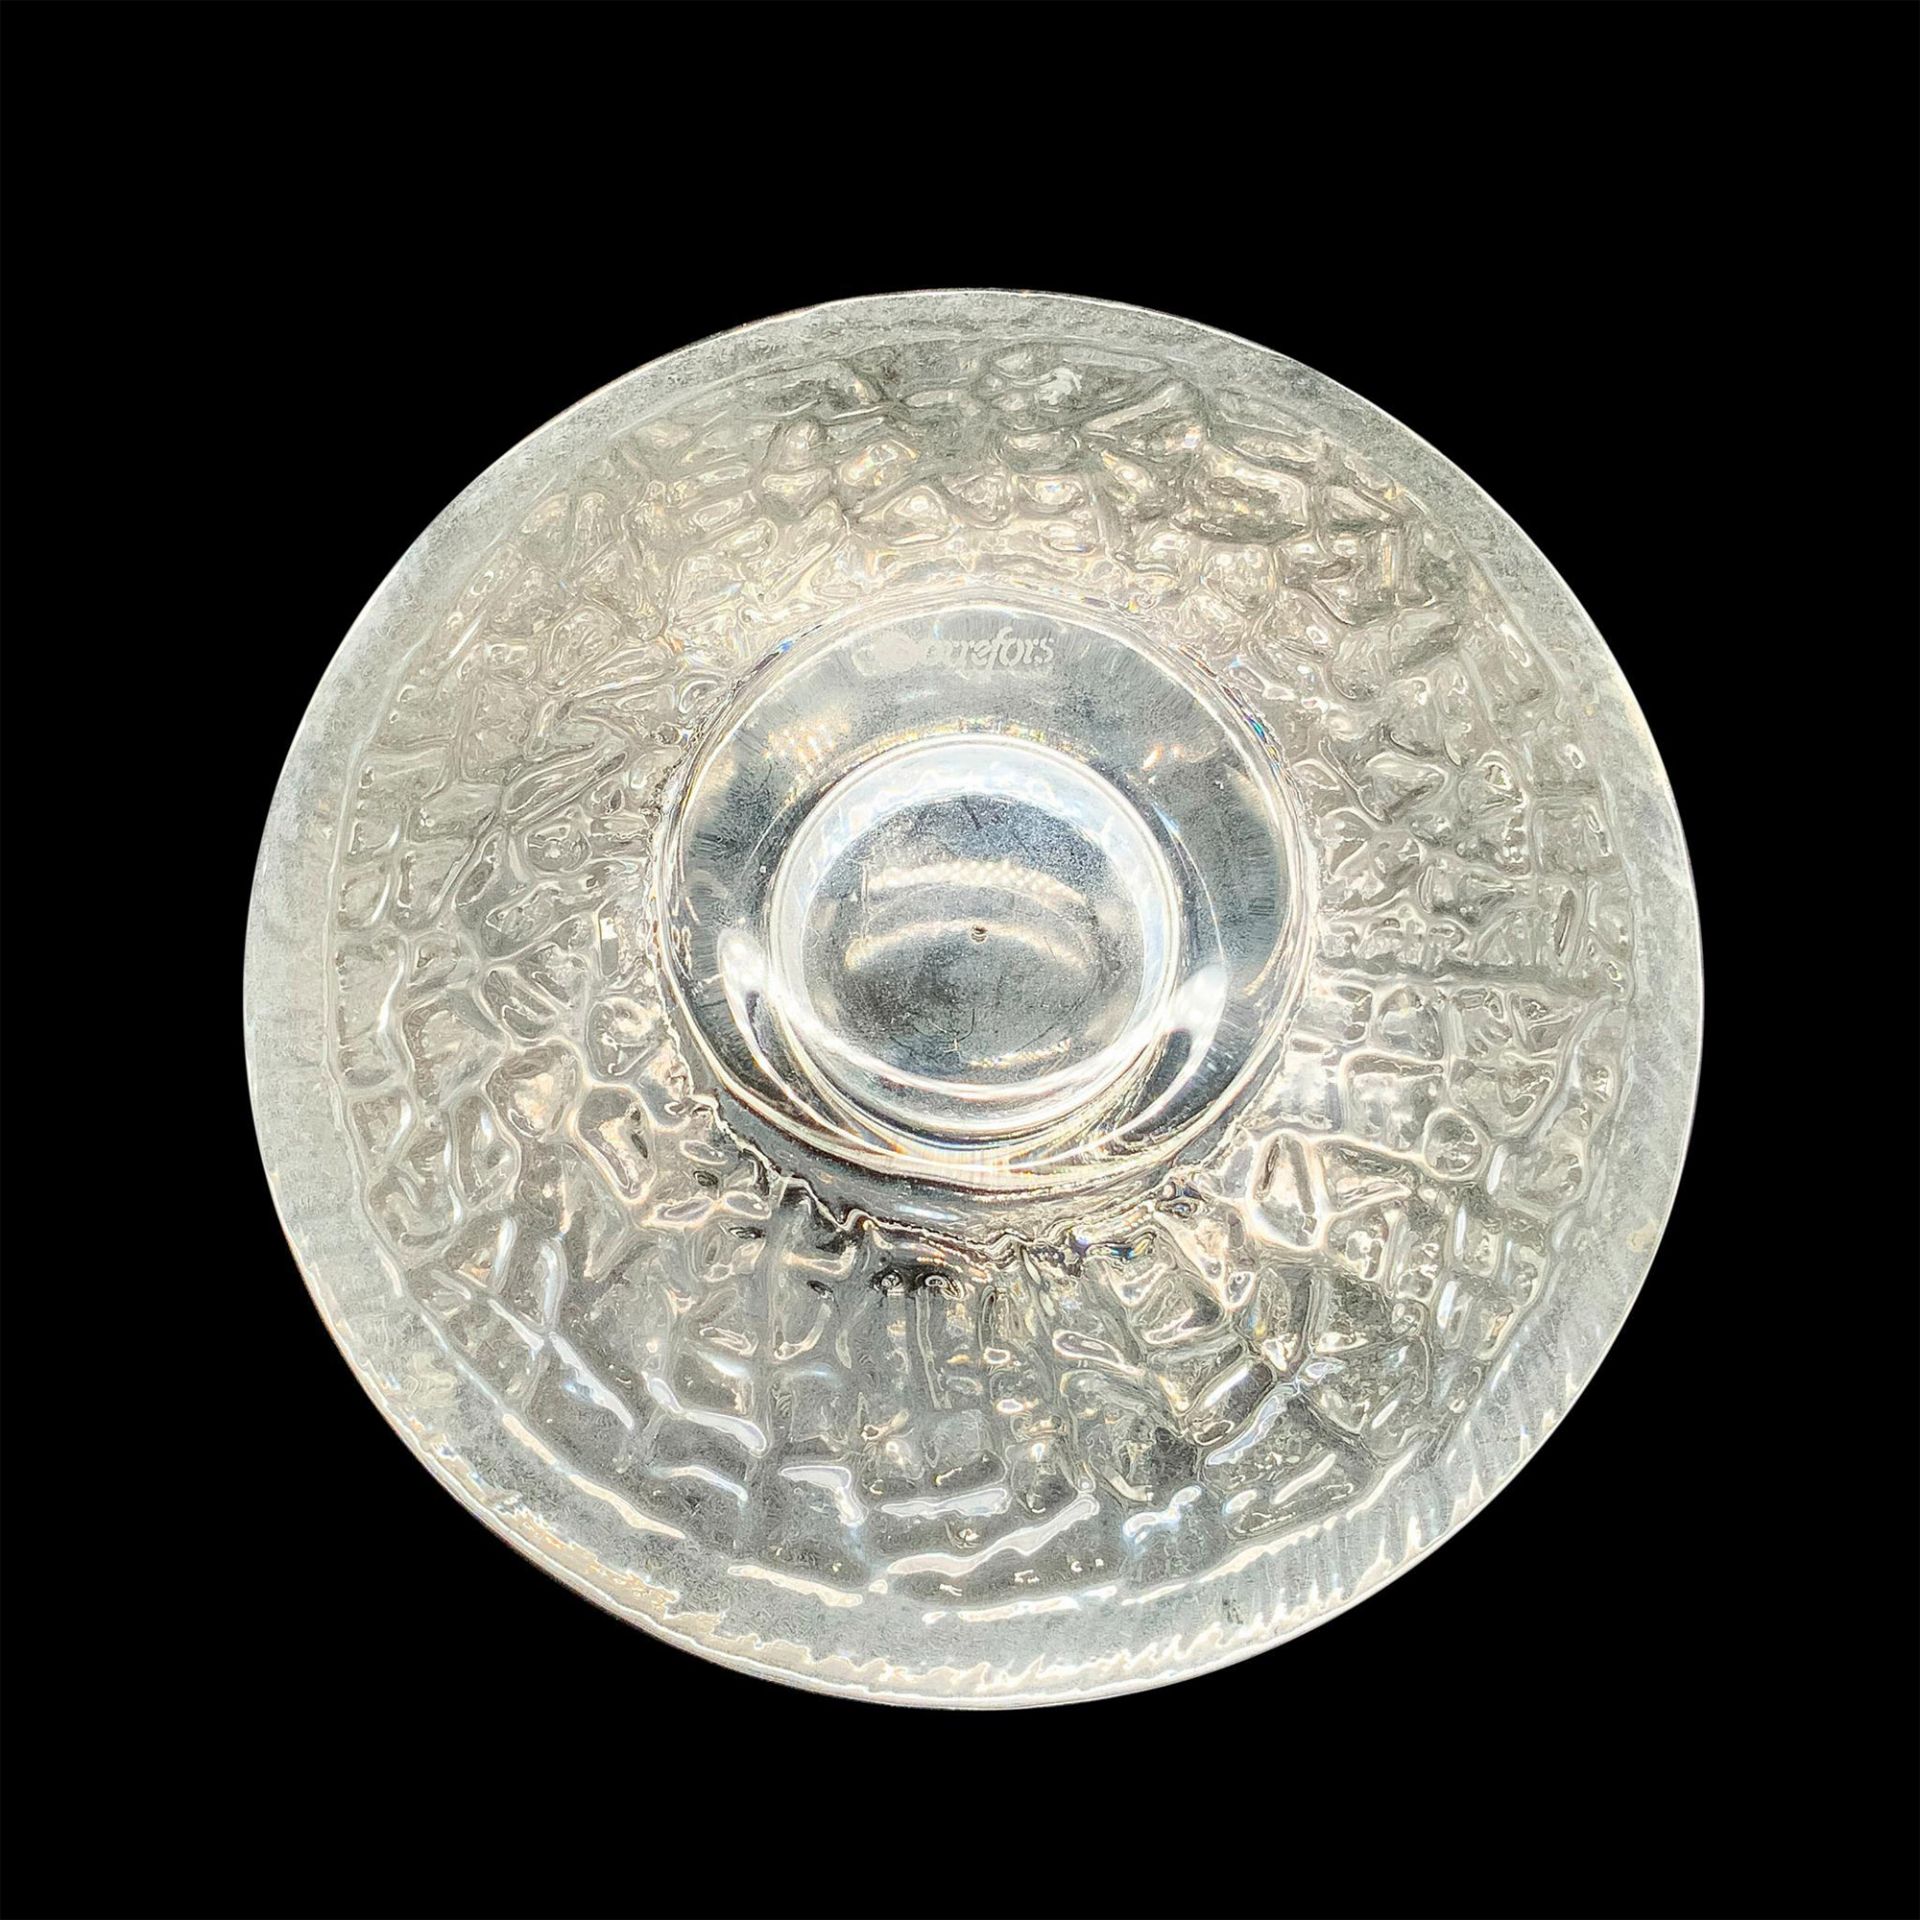 Orrefors Textured Crystal Discus Votive Candle Holder - Image 3 of 3